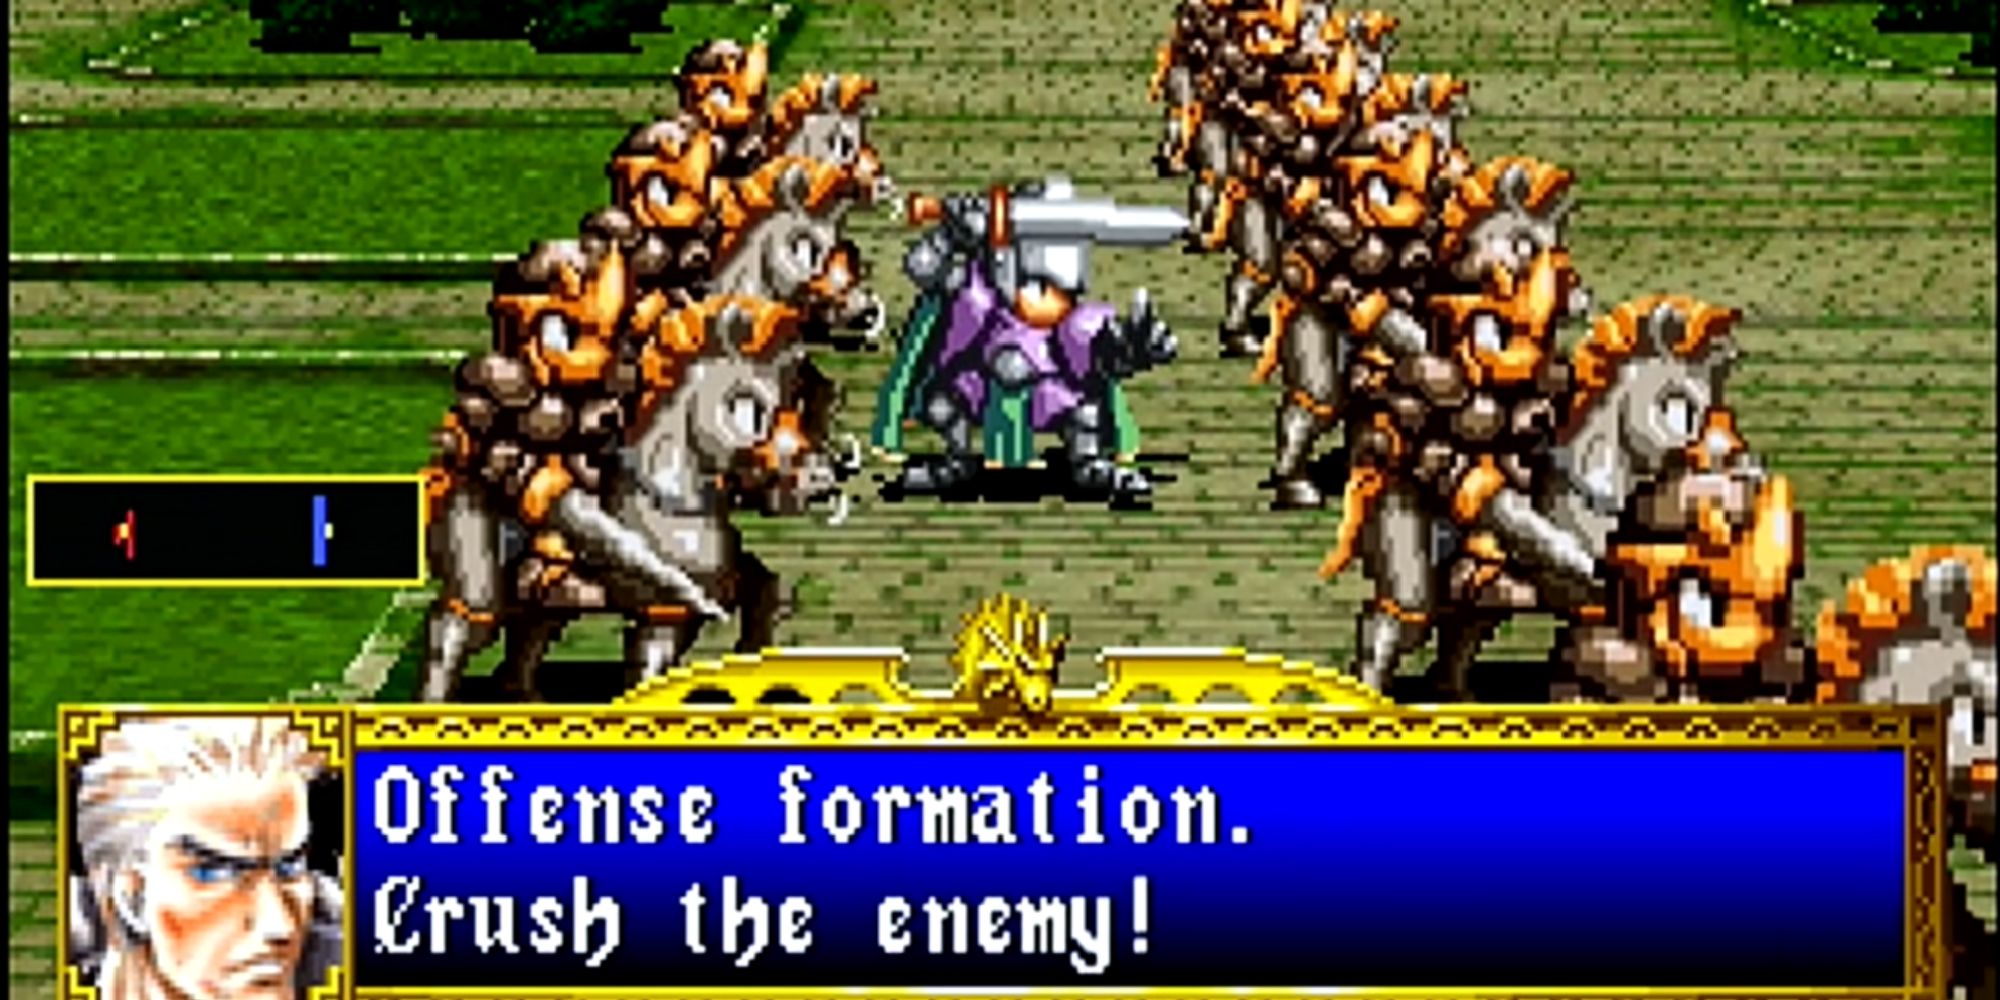 A screenshot from Dragon Force on the Saturn, showing a general telling their forces to crush the enemy